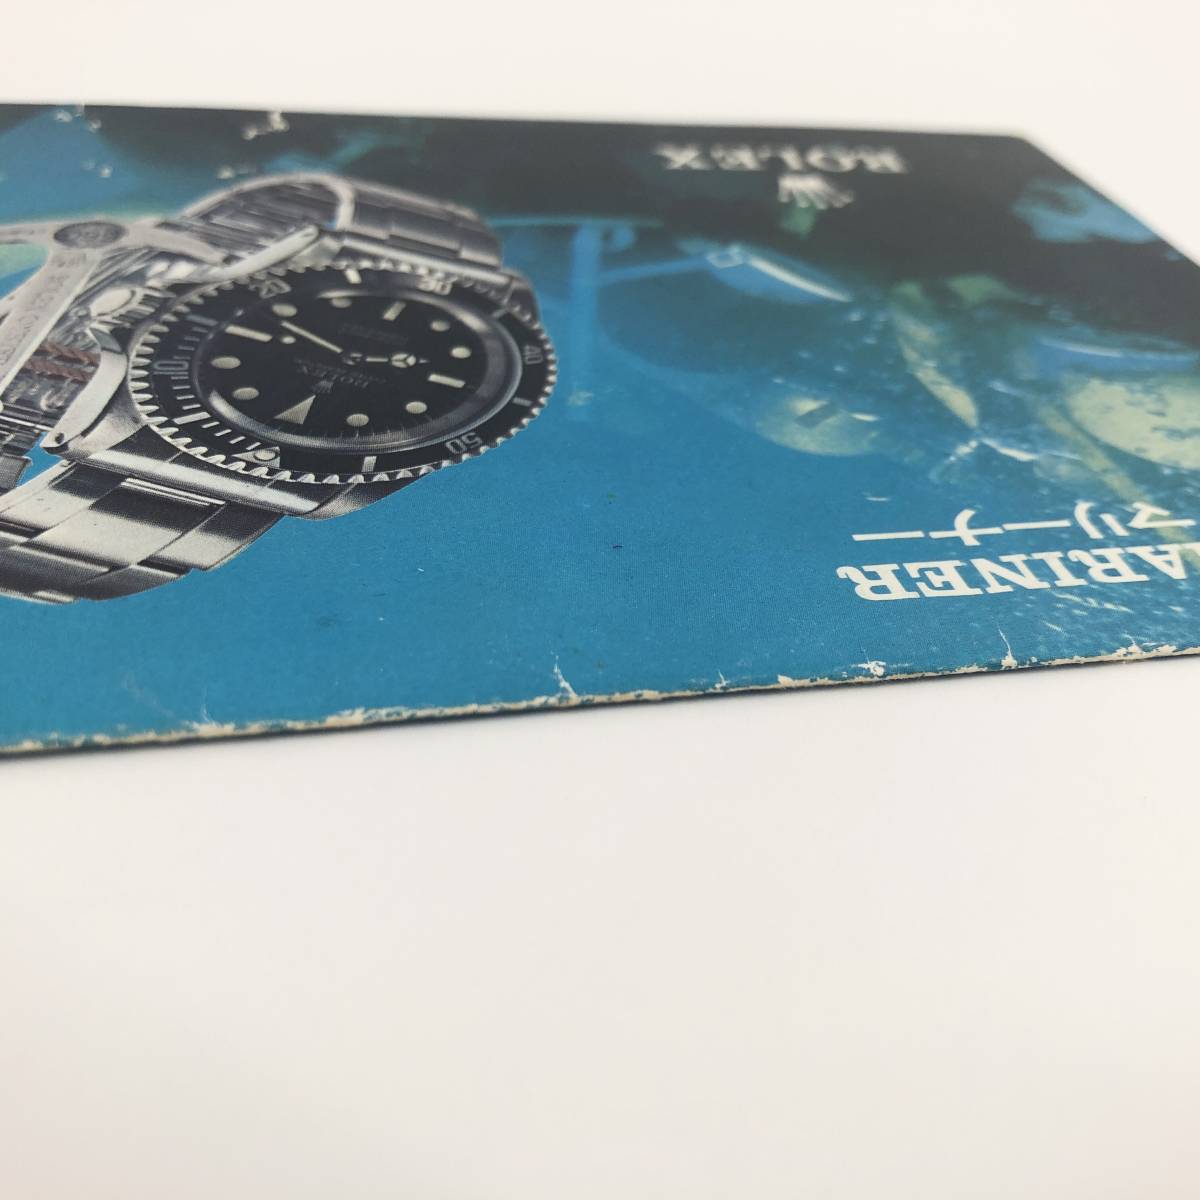 [ booklet only ] ultra rare ROLEX SUBMARINER Rolex Submarine 5513 publication oyster Perpetual Submarine - accessory ⑨